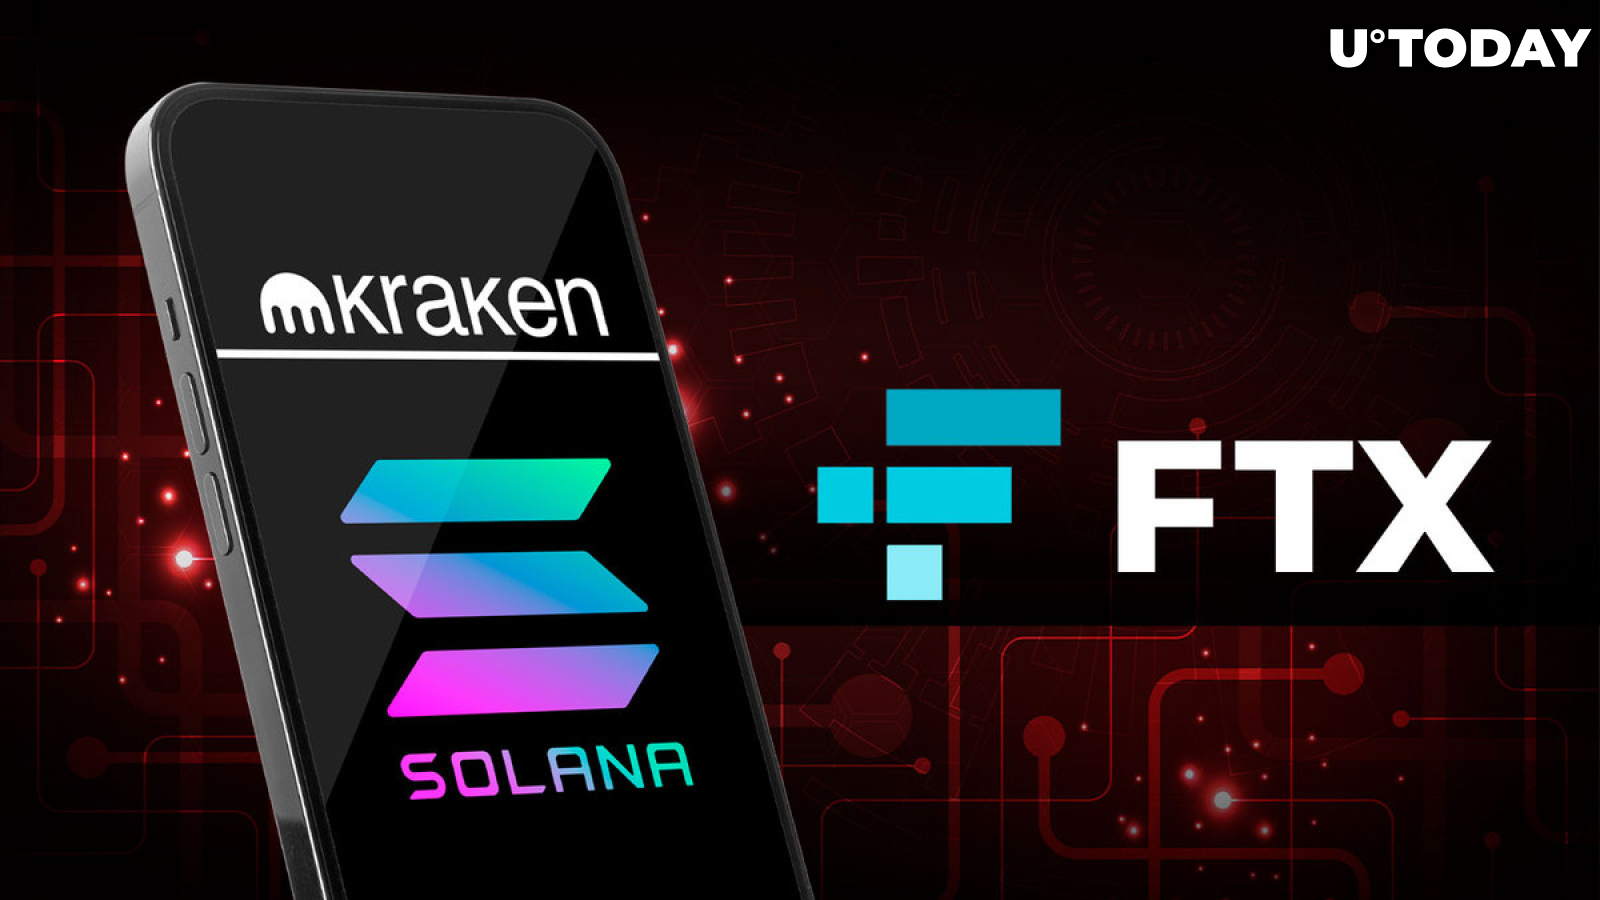 Solana (SOL) Liquidation on Kraken by FTX Looms, Price Reacts